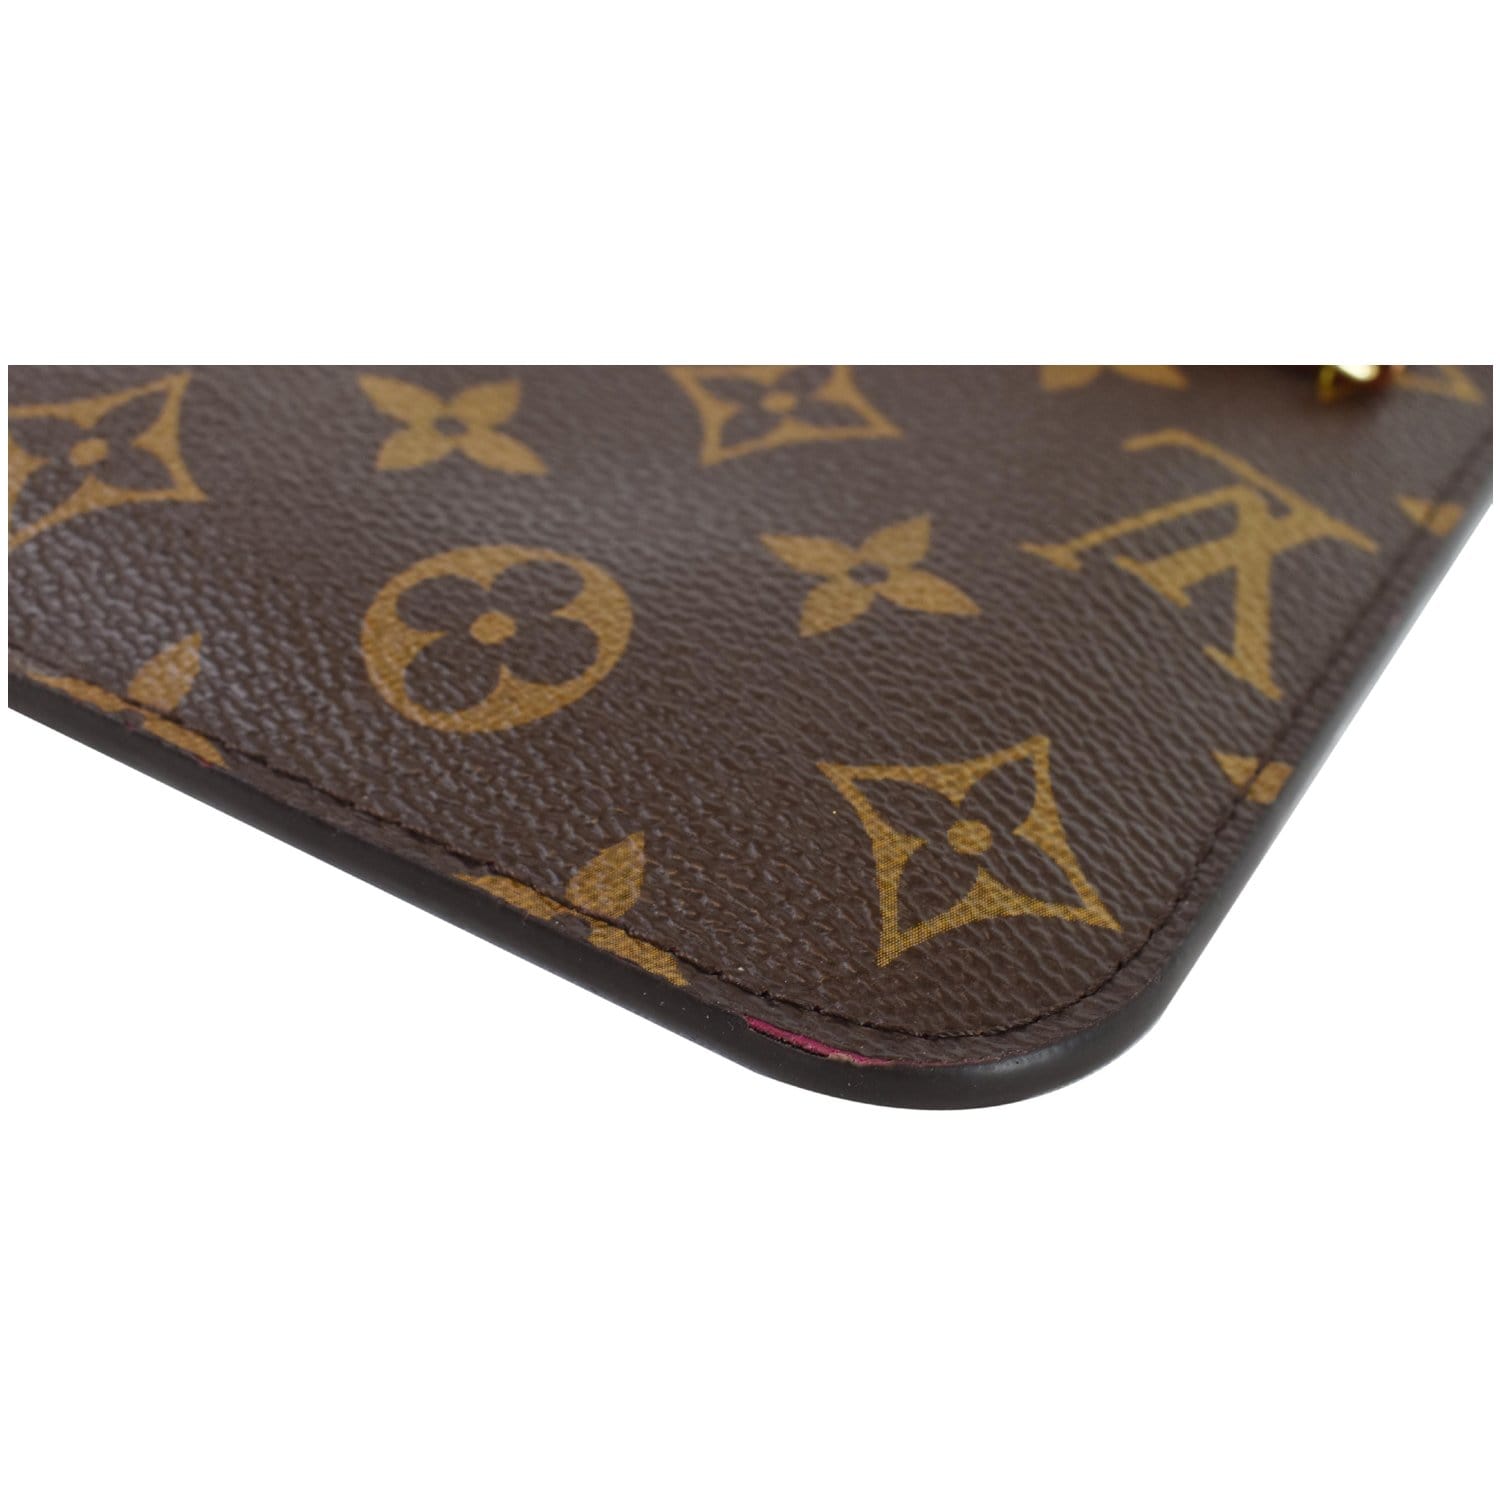 LOUIS VUITTON BROWN LEATHER LV MONOGRAMMED COMPUTER BAG.